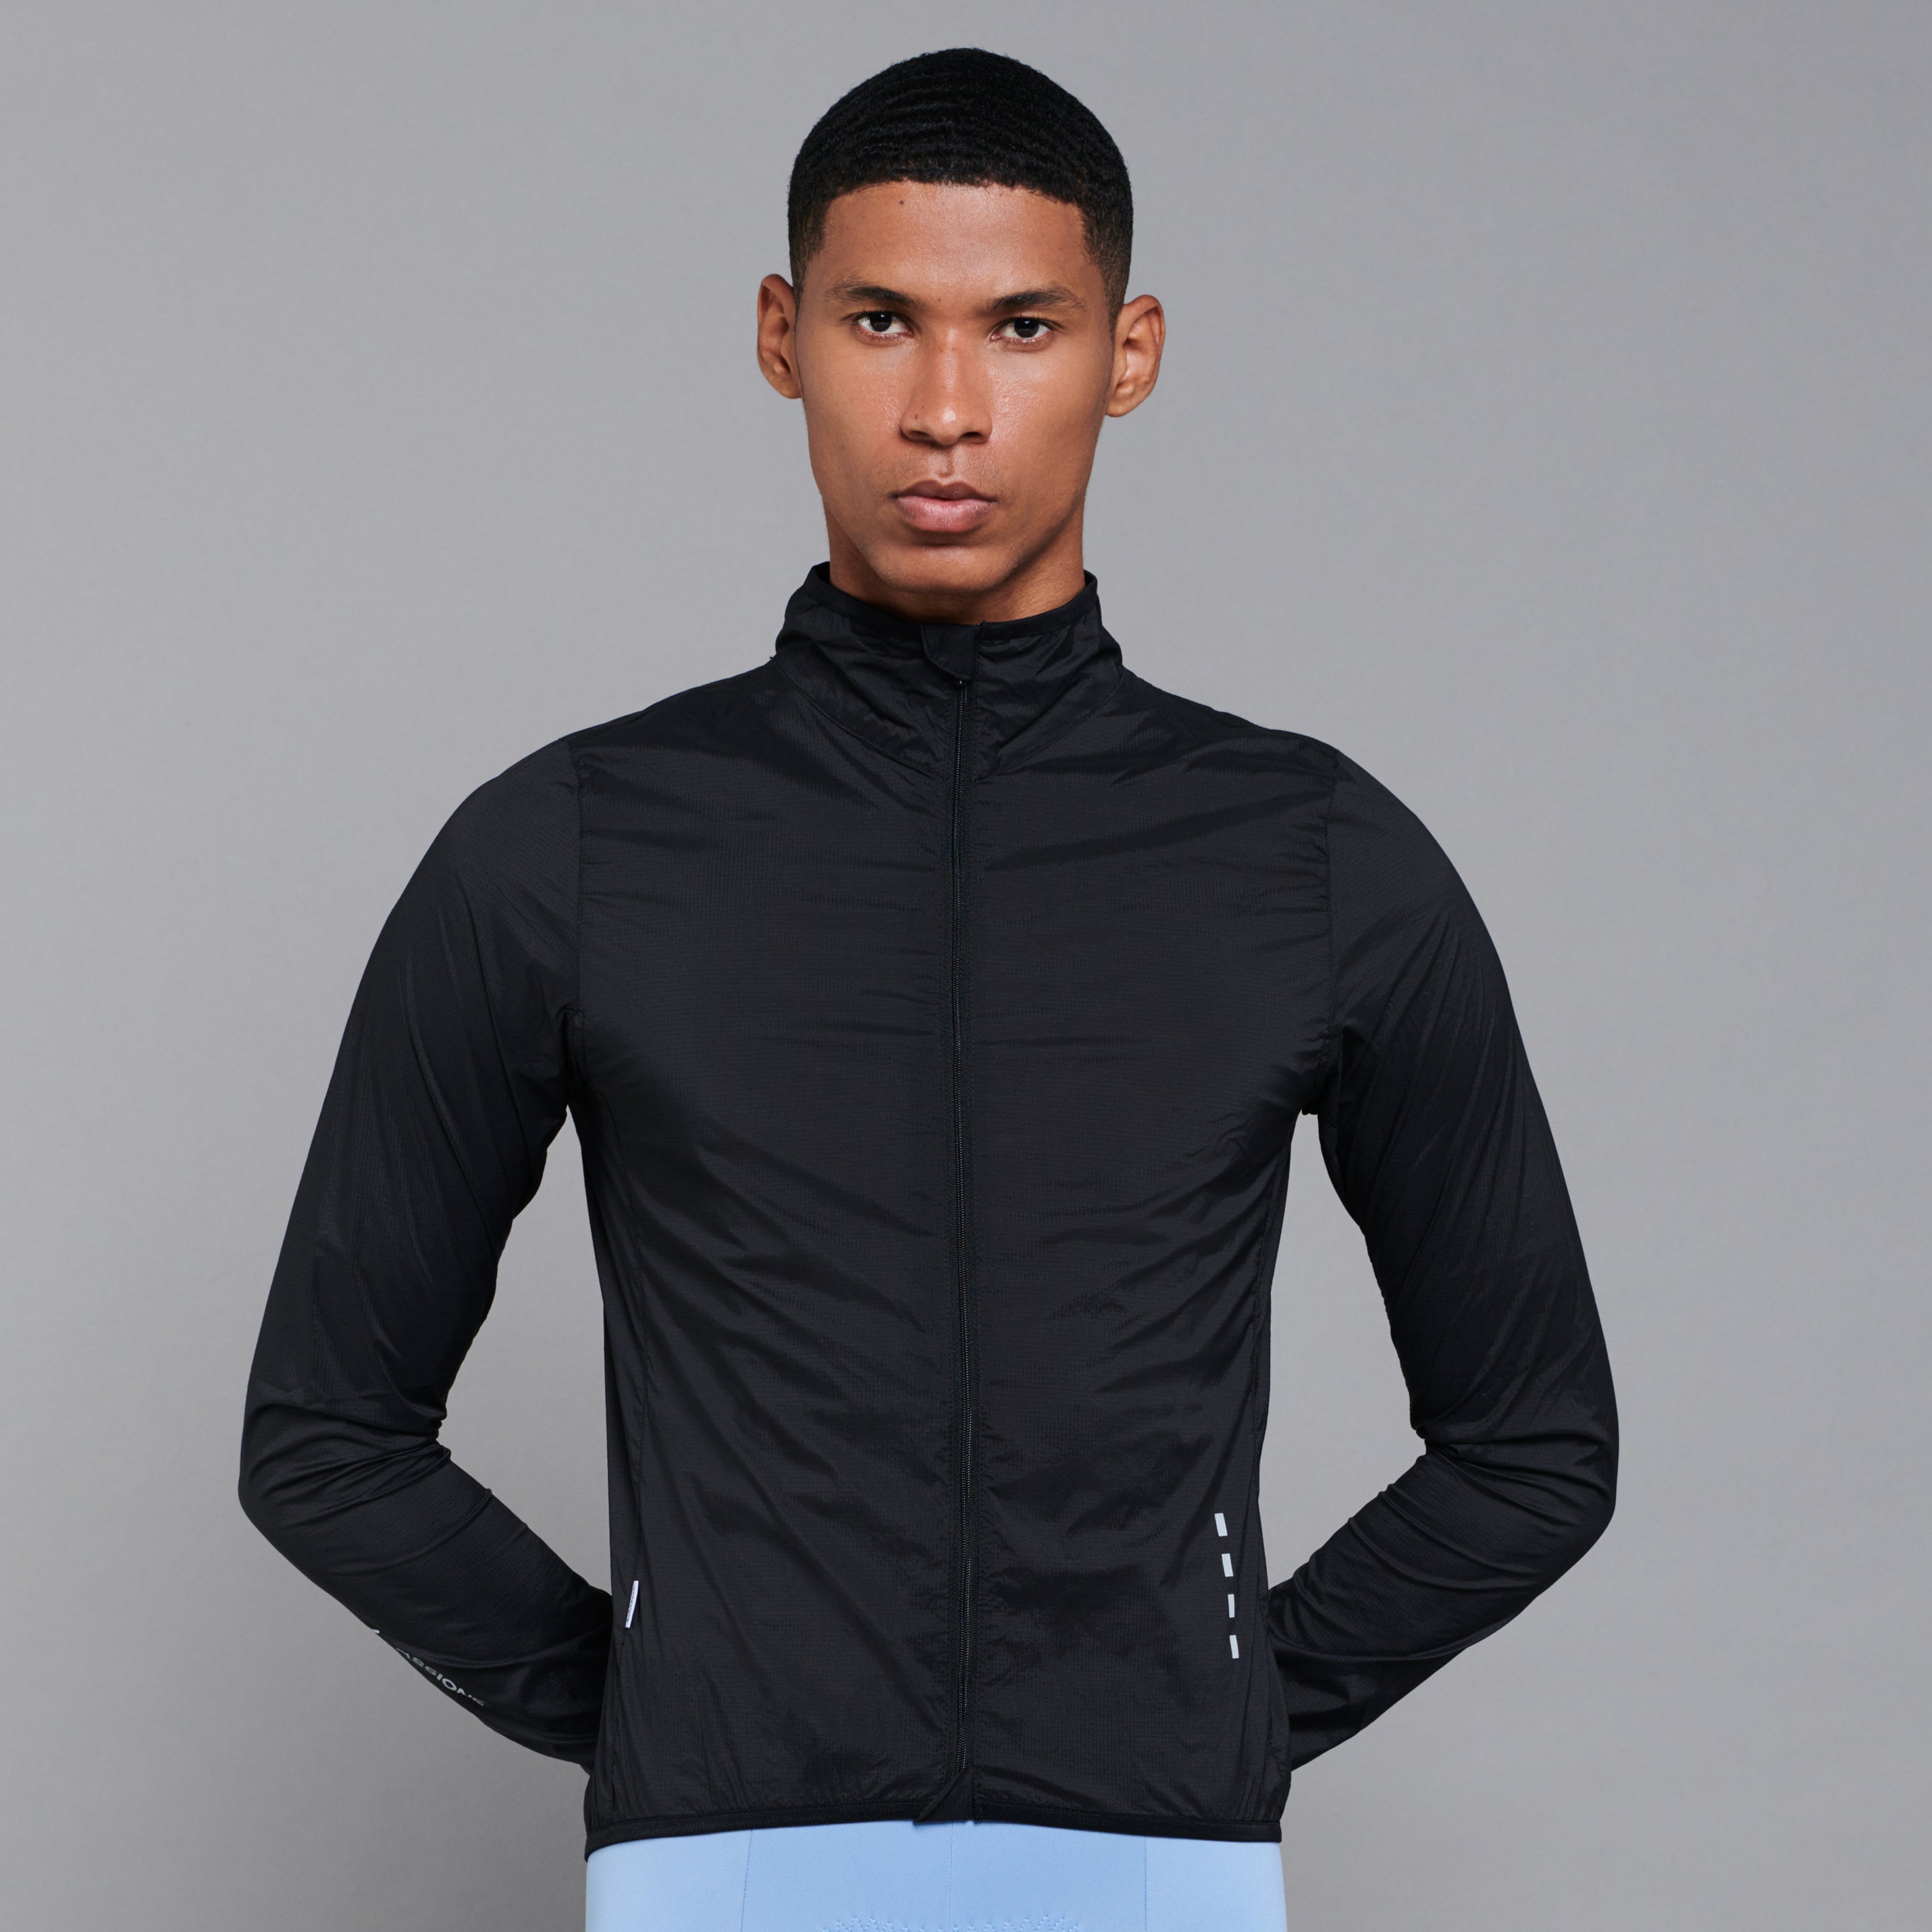 Wind Jacket Black – La Passione Cycling Couture